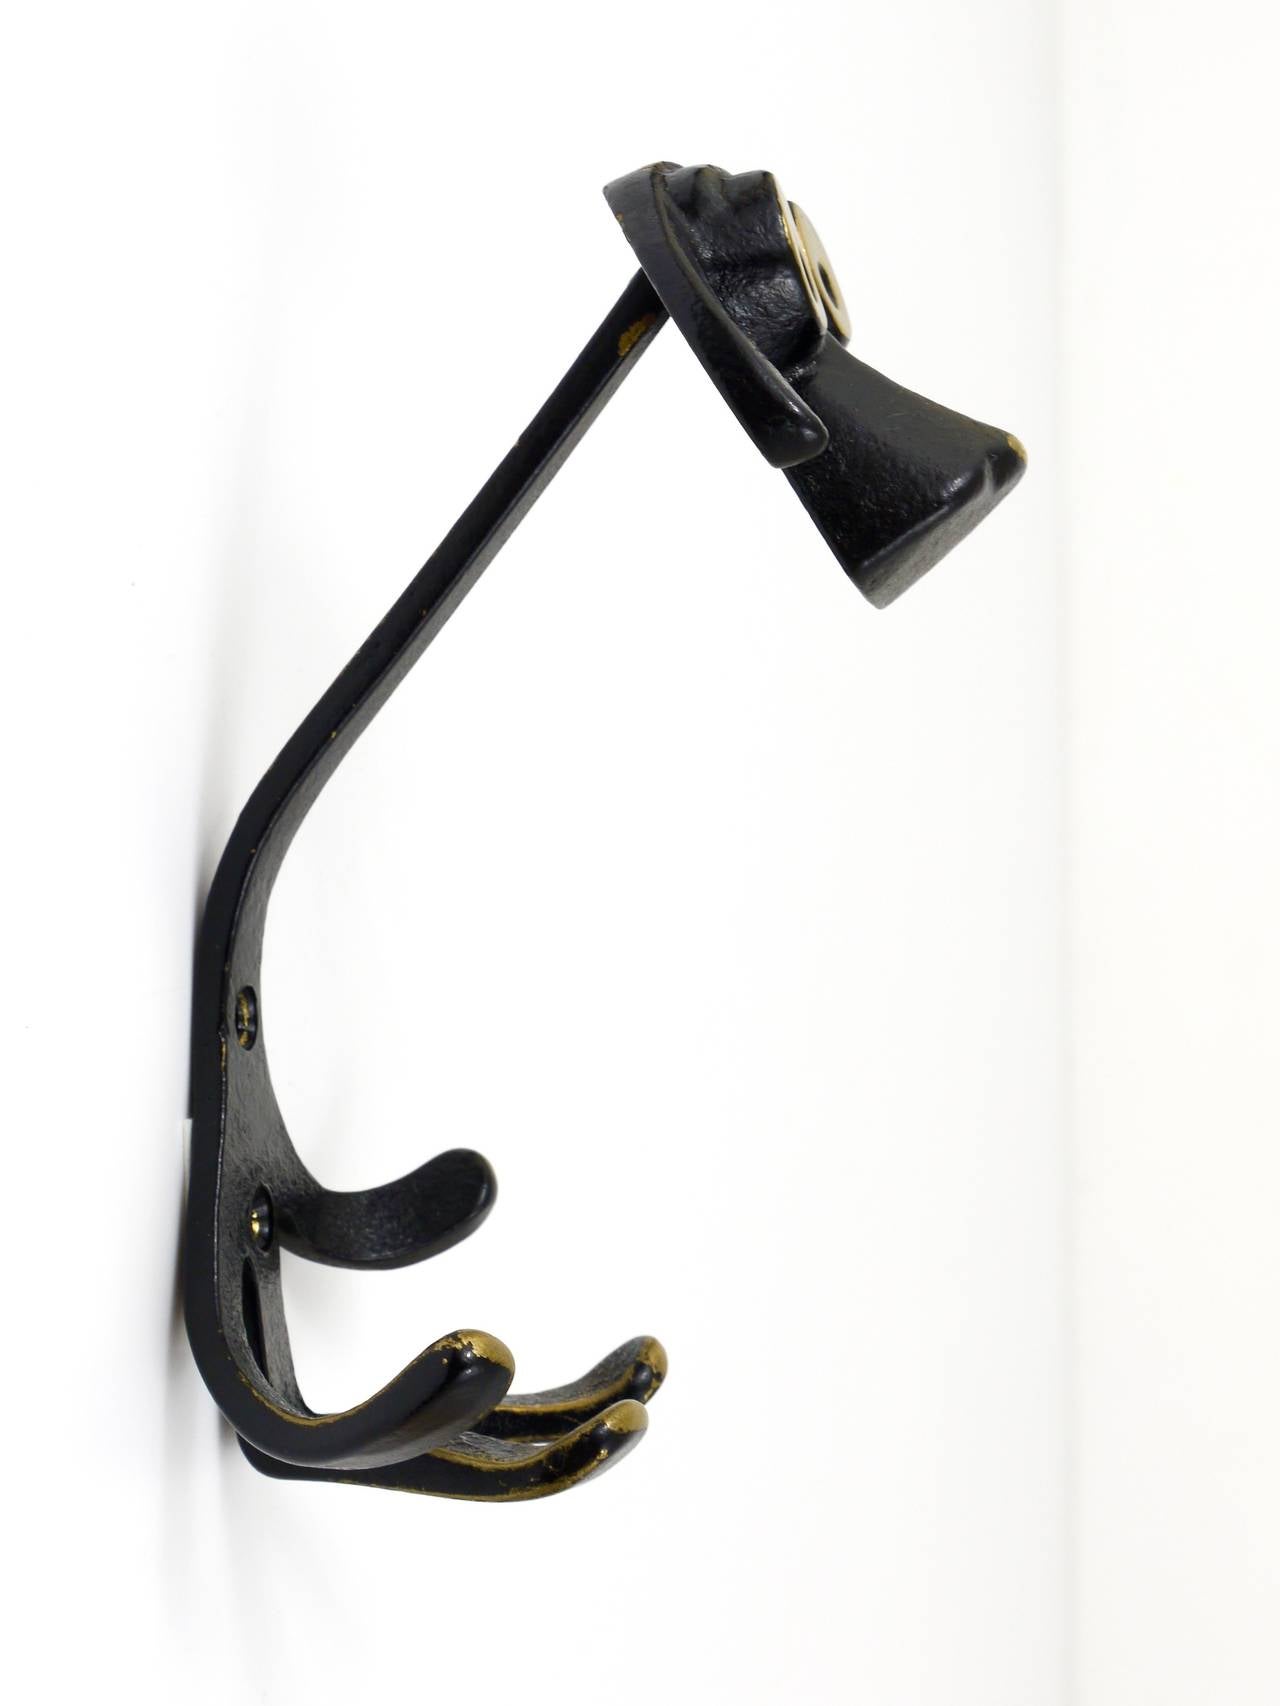 A set of two Austrian modernist brass wall coat hooks, displaying a dog. A very humorous design by Walter Bosse, executed by Hertha Baller Austria in the 1950s. Made of black finished brass. In very good condition with nice patina. Each hook has a